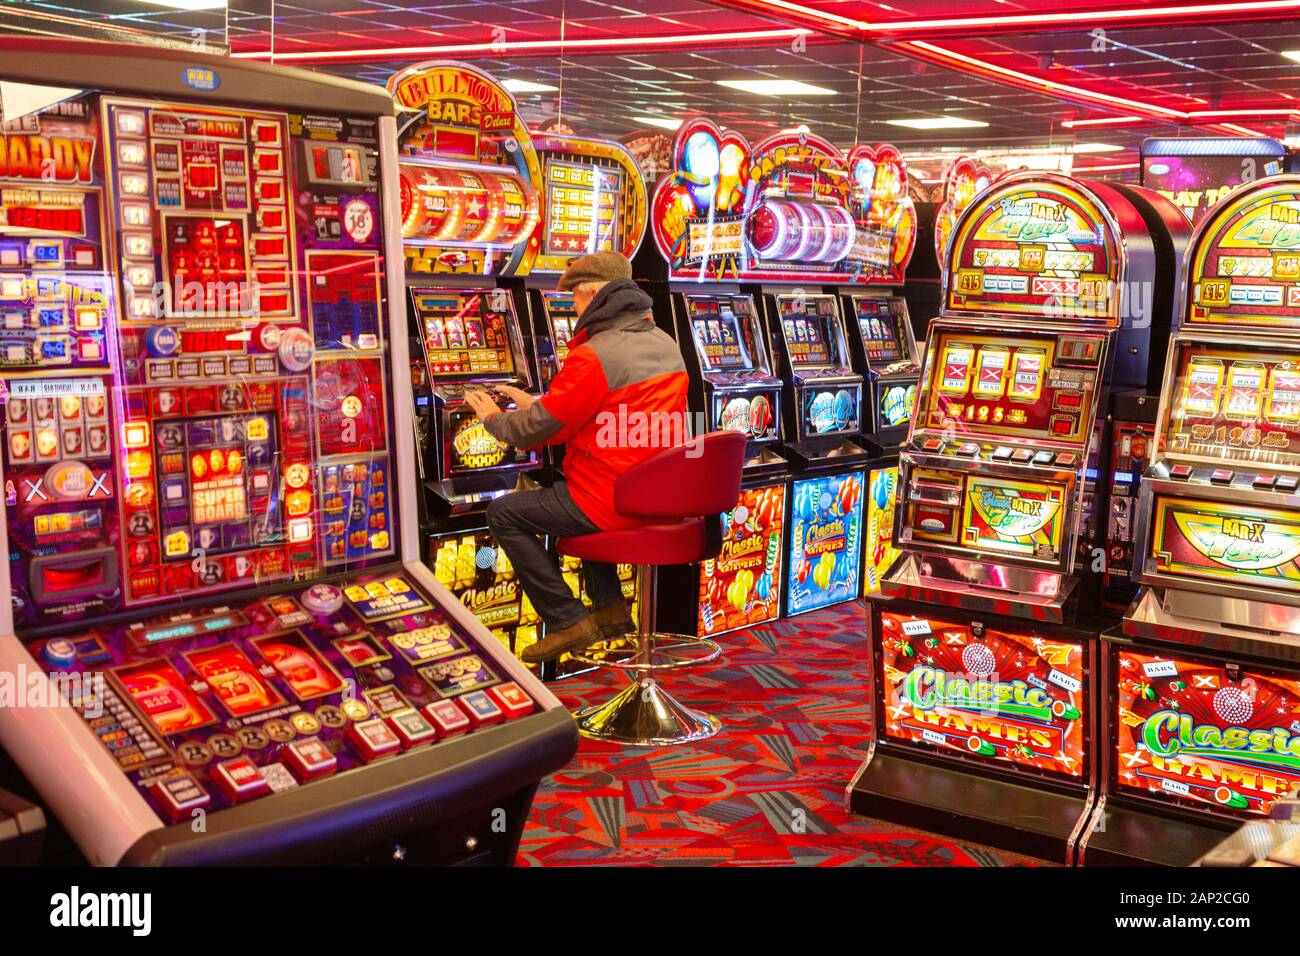 Gambling UK - a man playing slot machines in a casino, example of a gambling lifestyle; Skegness Lincolnshire England UK Stock Photo